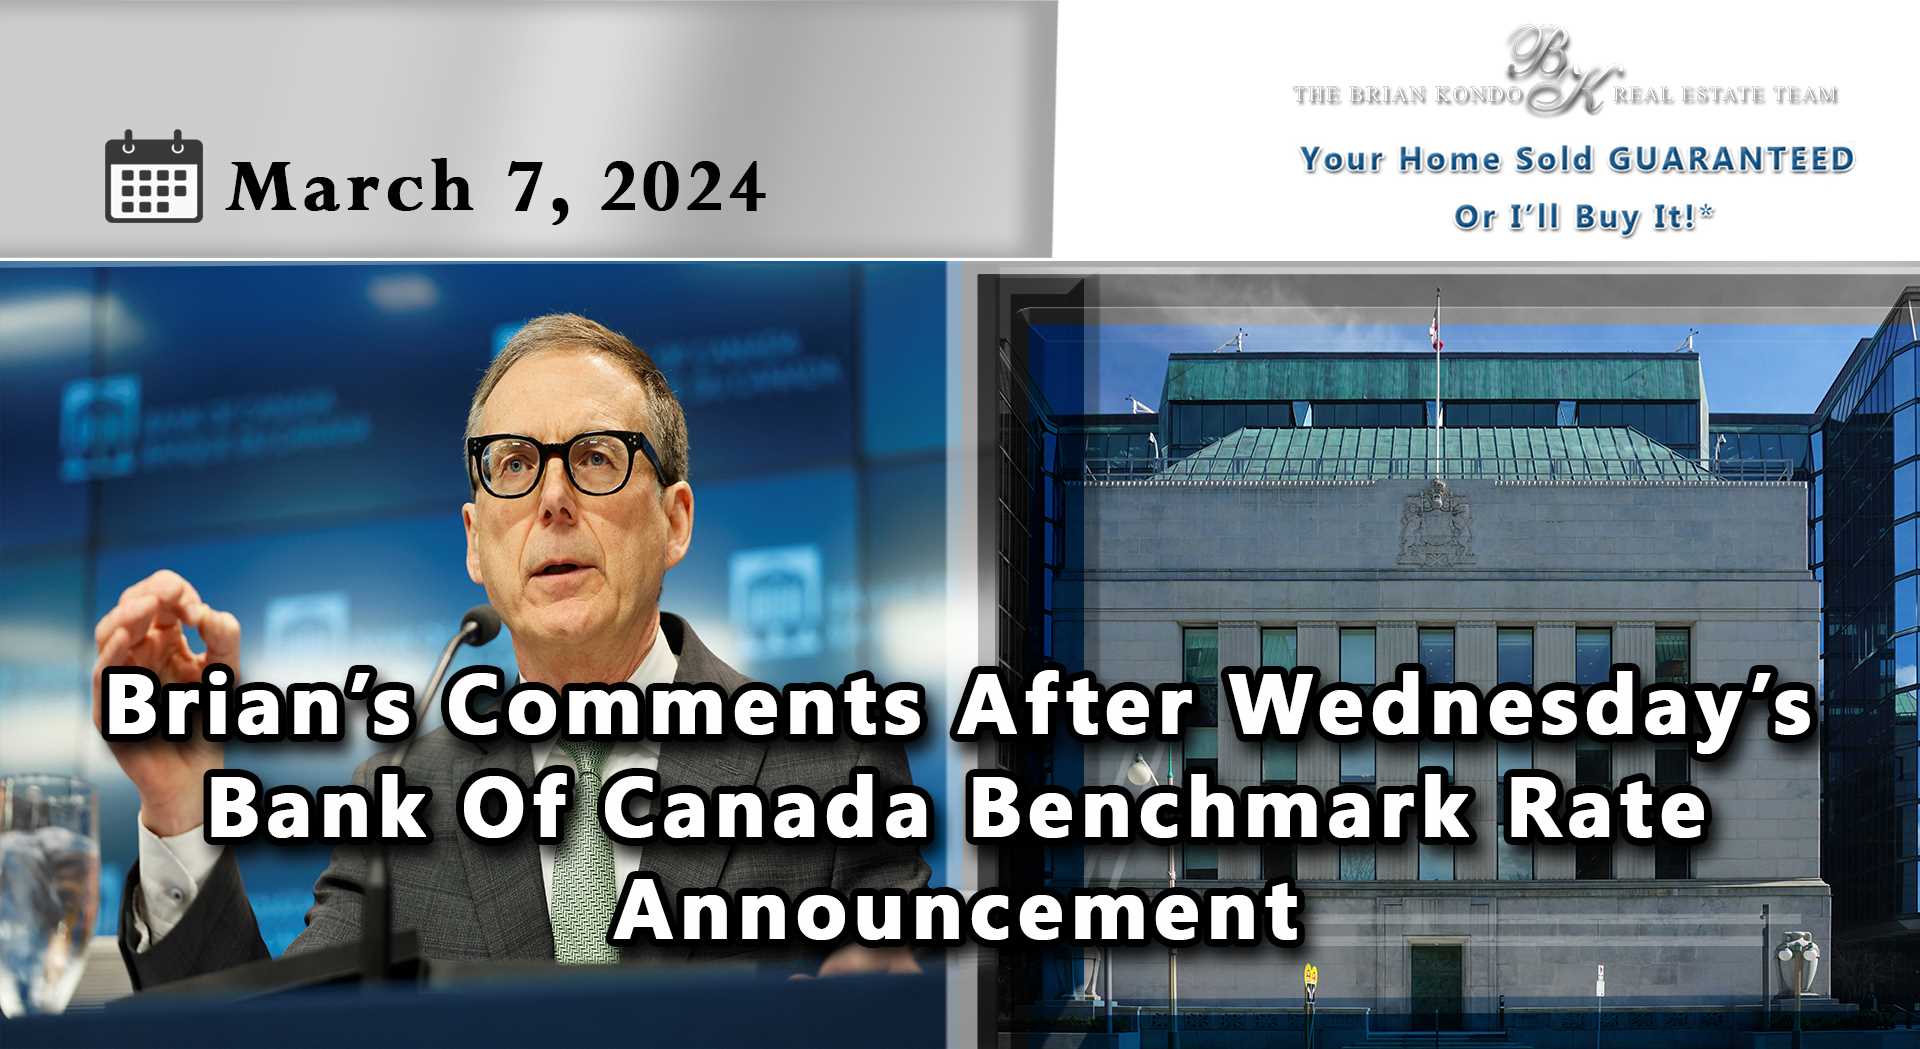 Brian’s Comments After Wednesday’s Bank Of Canada Benchmark Rate Announcement